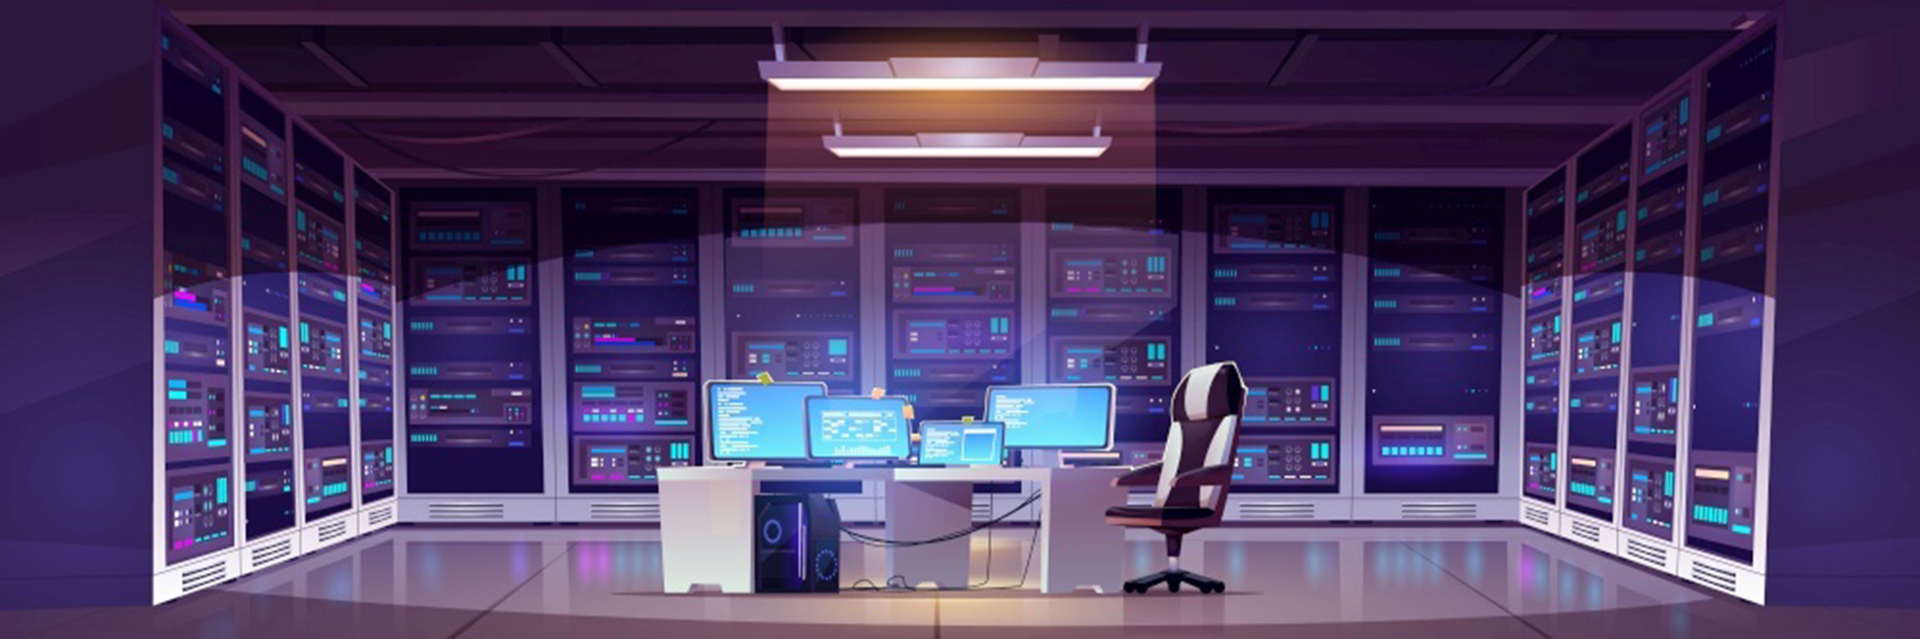 Data center room with server hardware, chair and desk with computer monitors. Vector cartoon interior of information storage office with control panel, racks with hardware for network